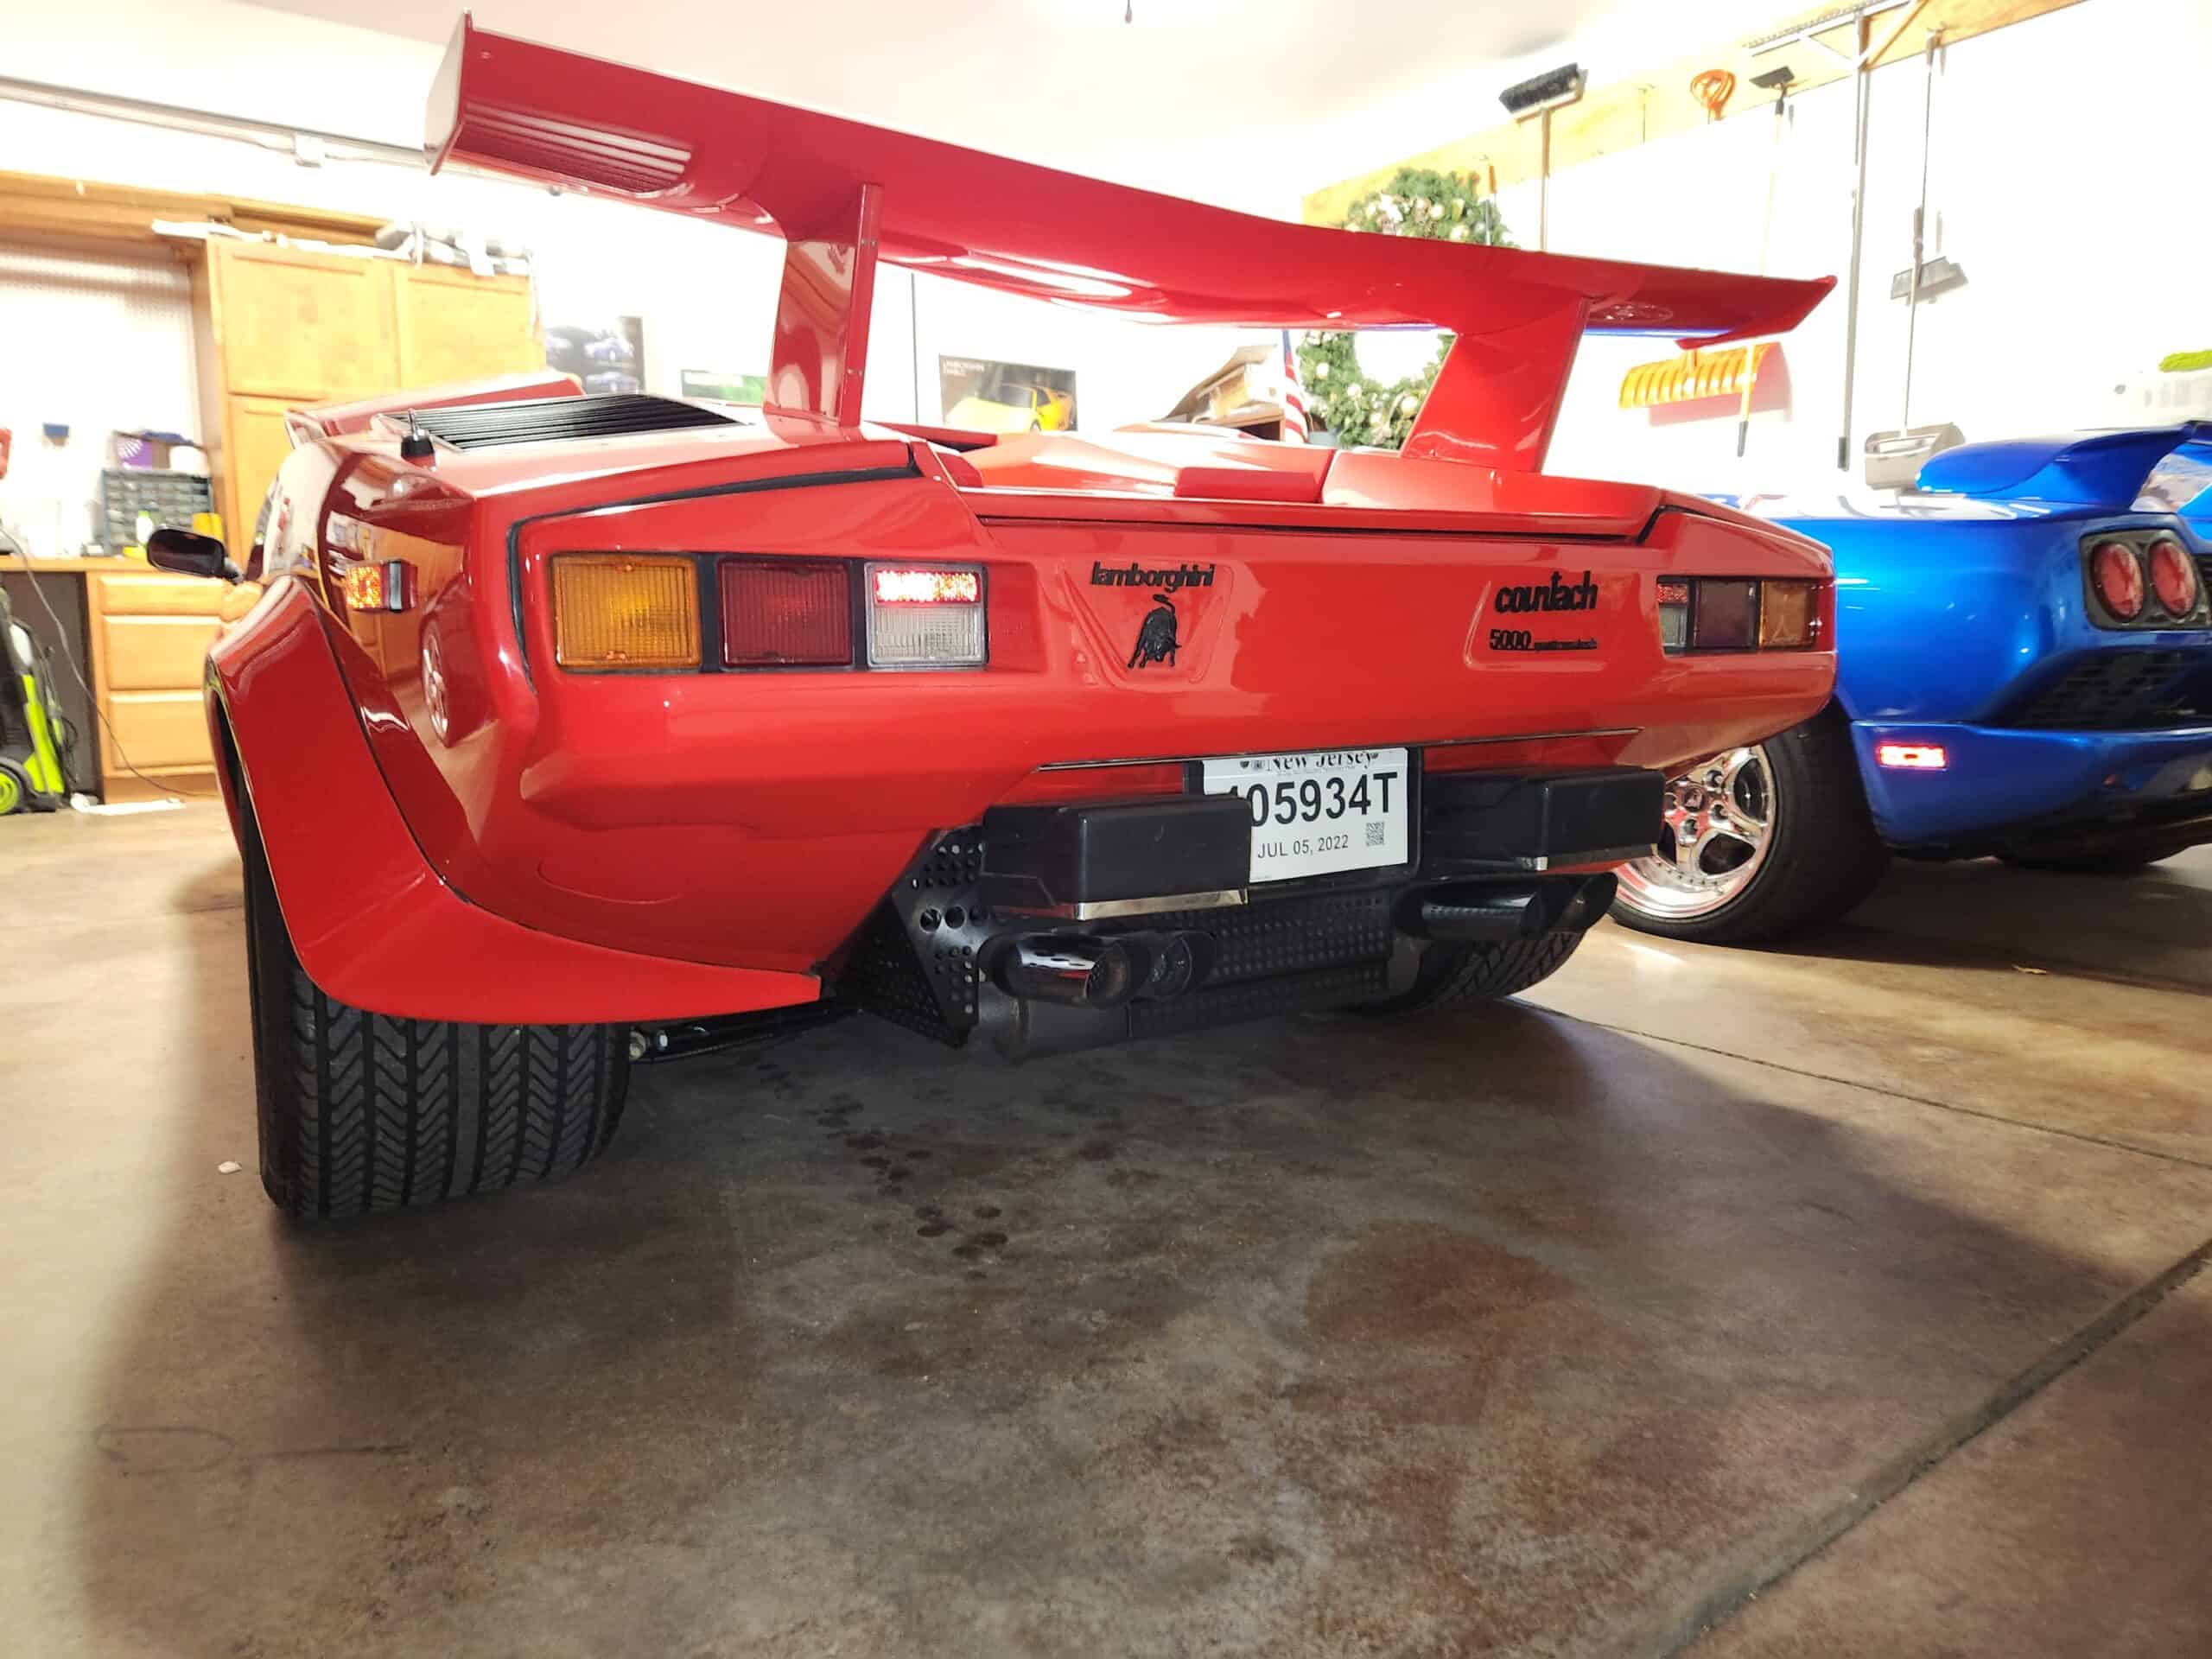 Why the Lamborghini Countach is the best car of all time